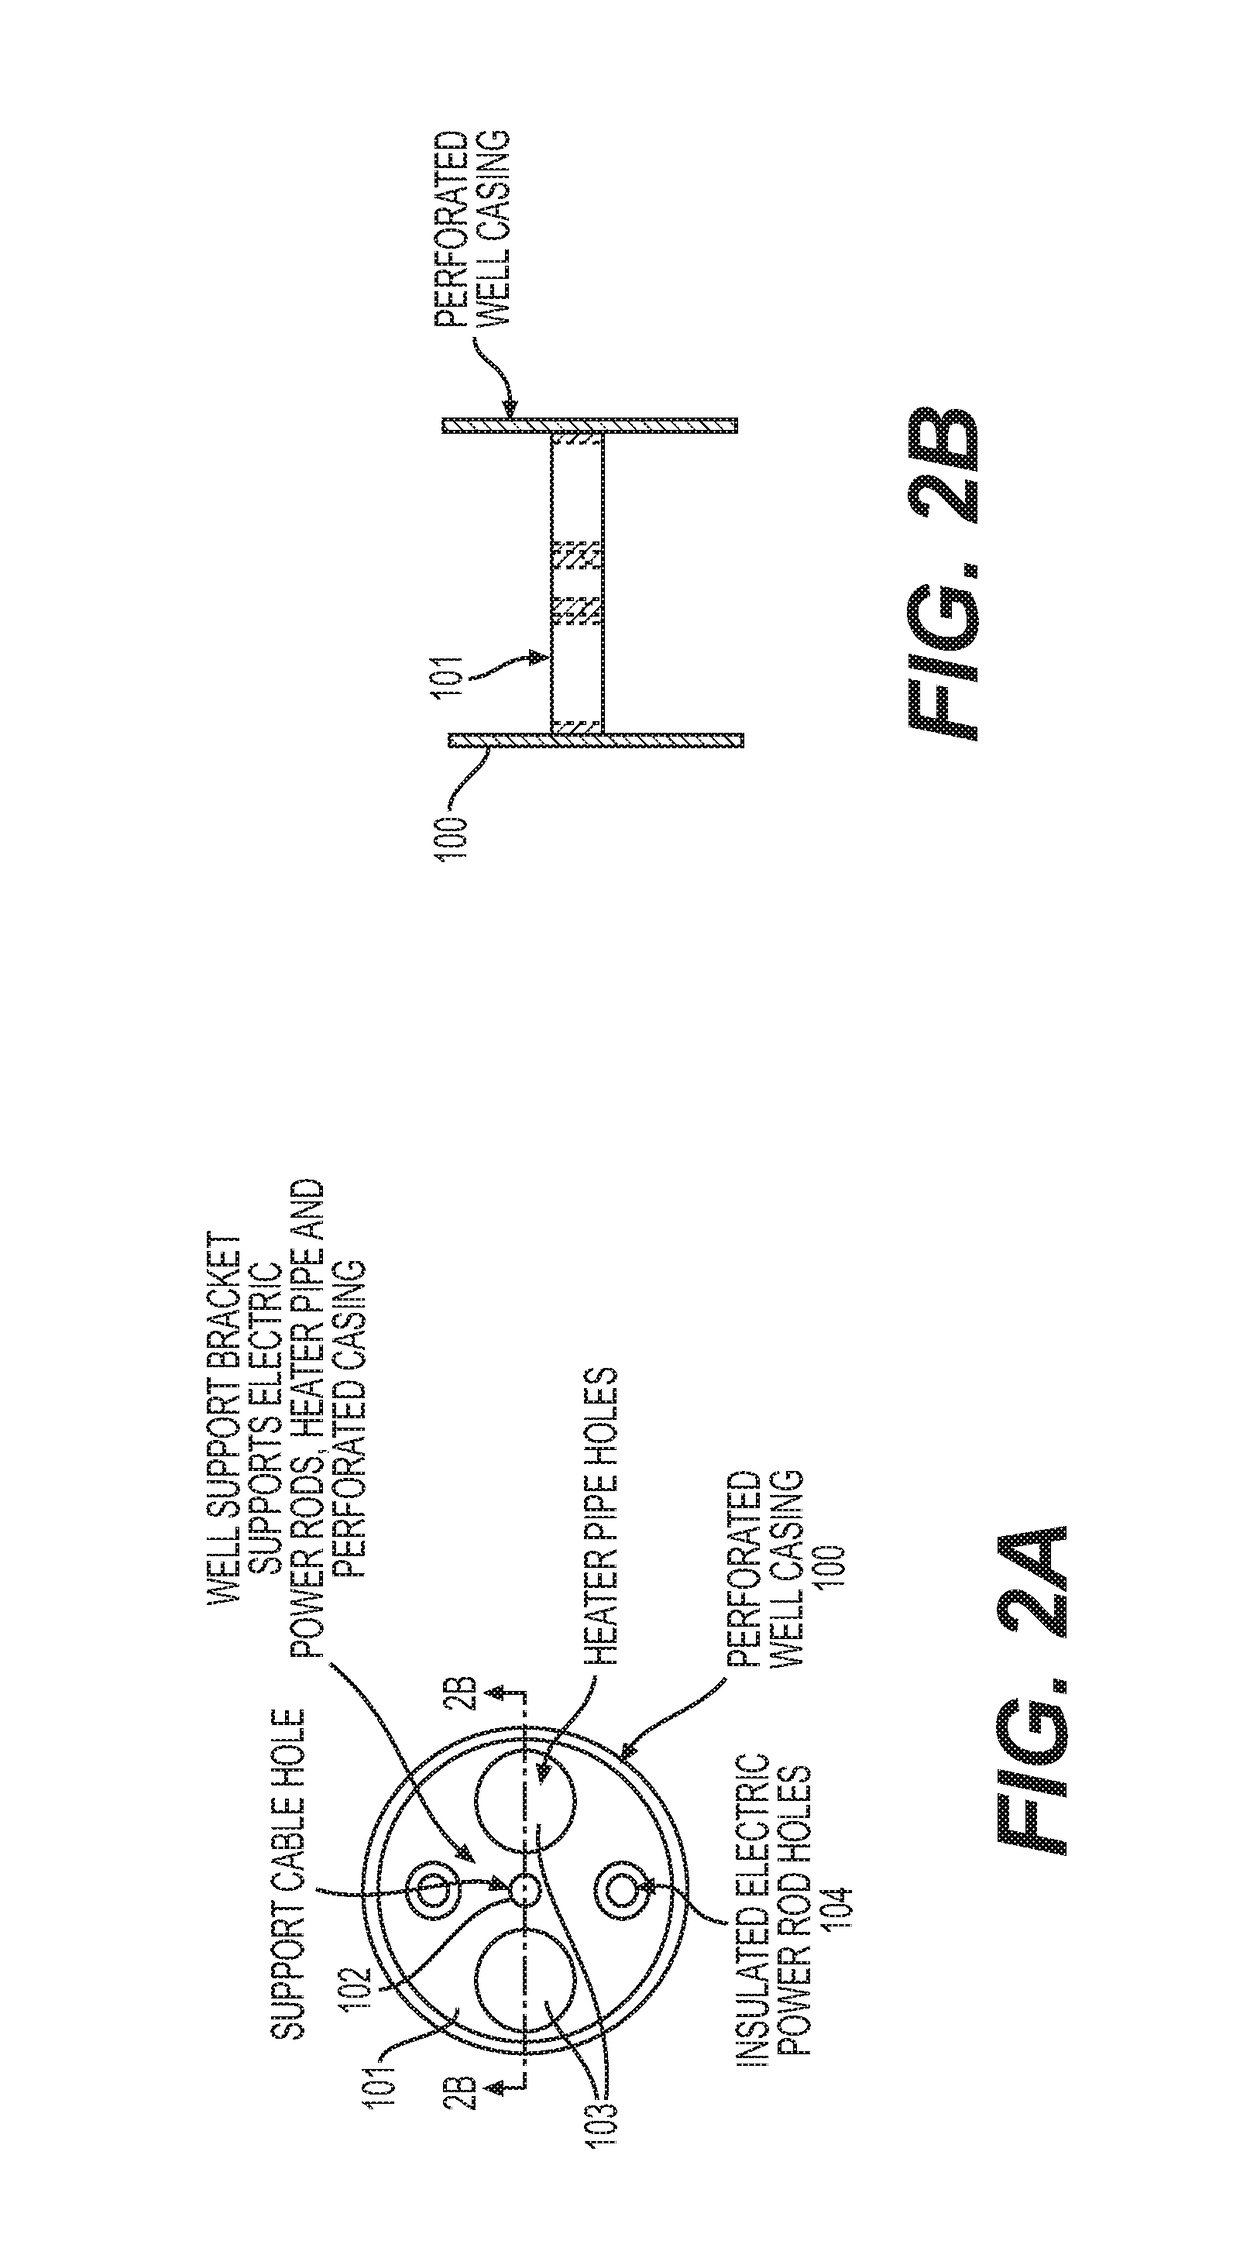 Systems and methods for the in situ recovery of hydrocarbonaceous products from oil shale and/or oil sands